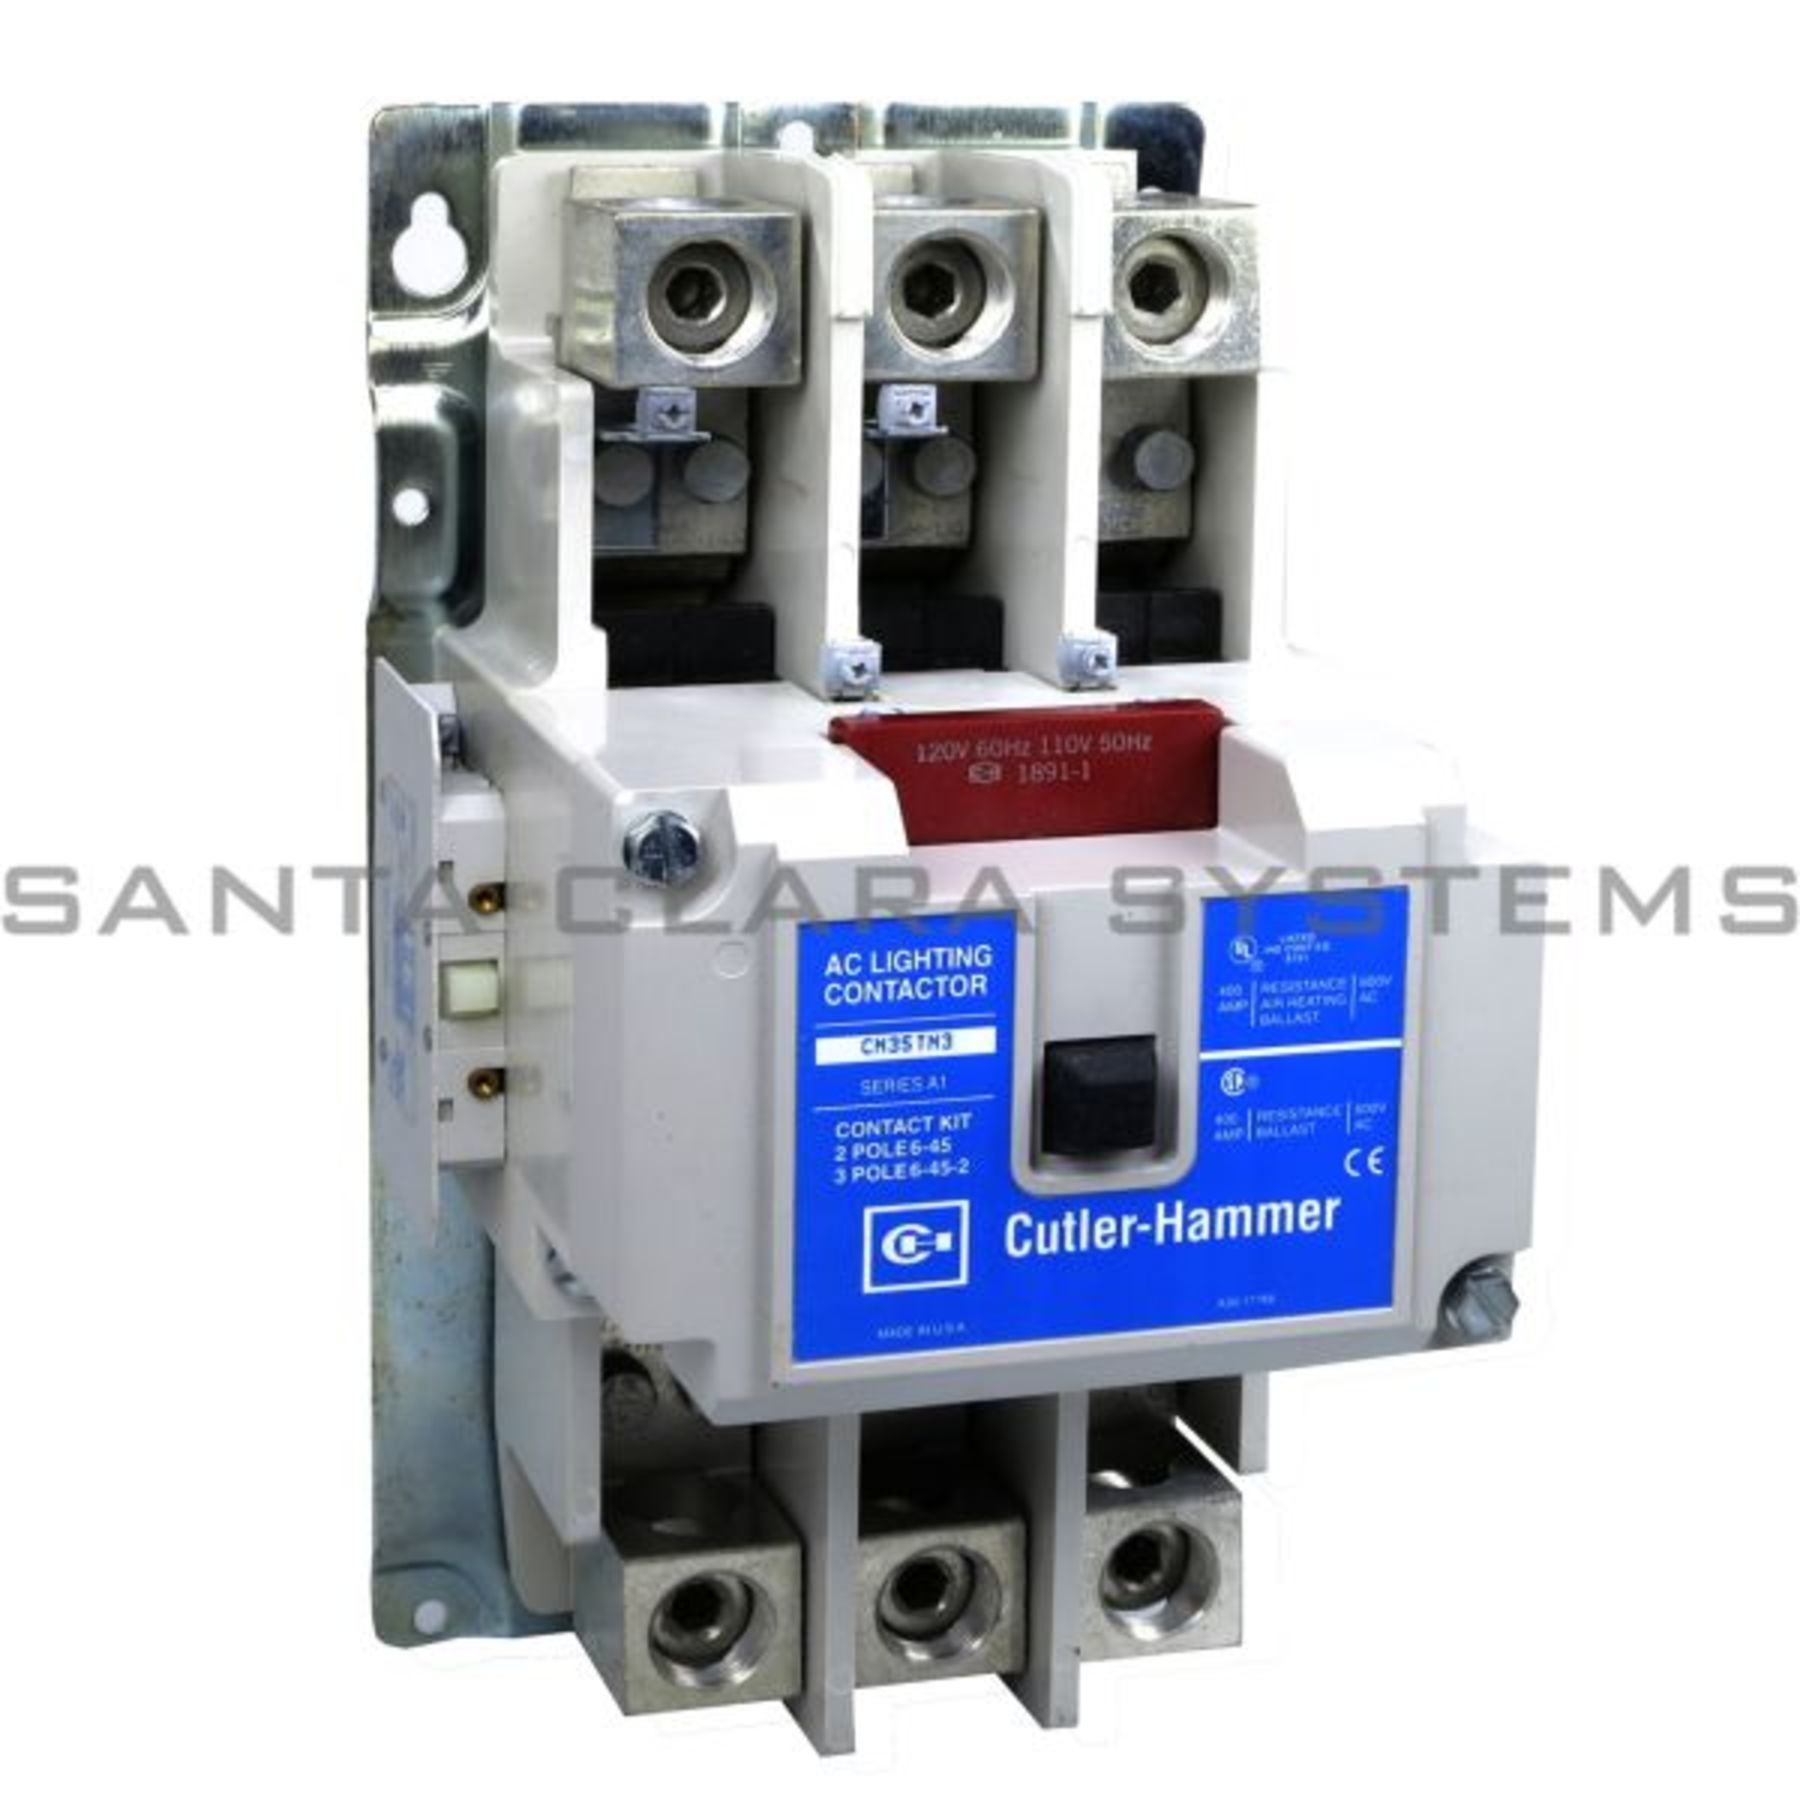 Cn35tn3a Ac Lighting Contactor In Stock